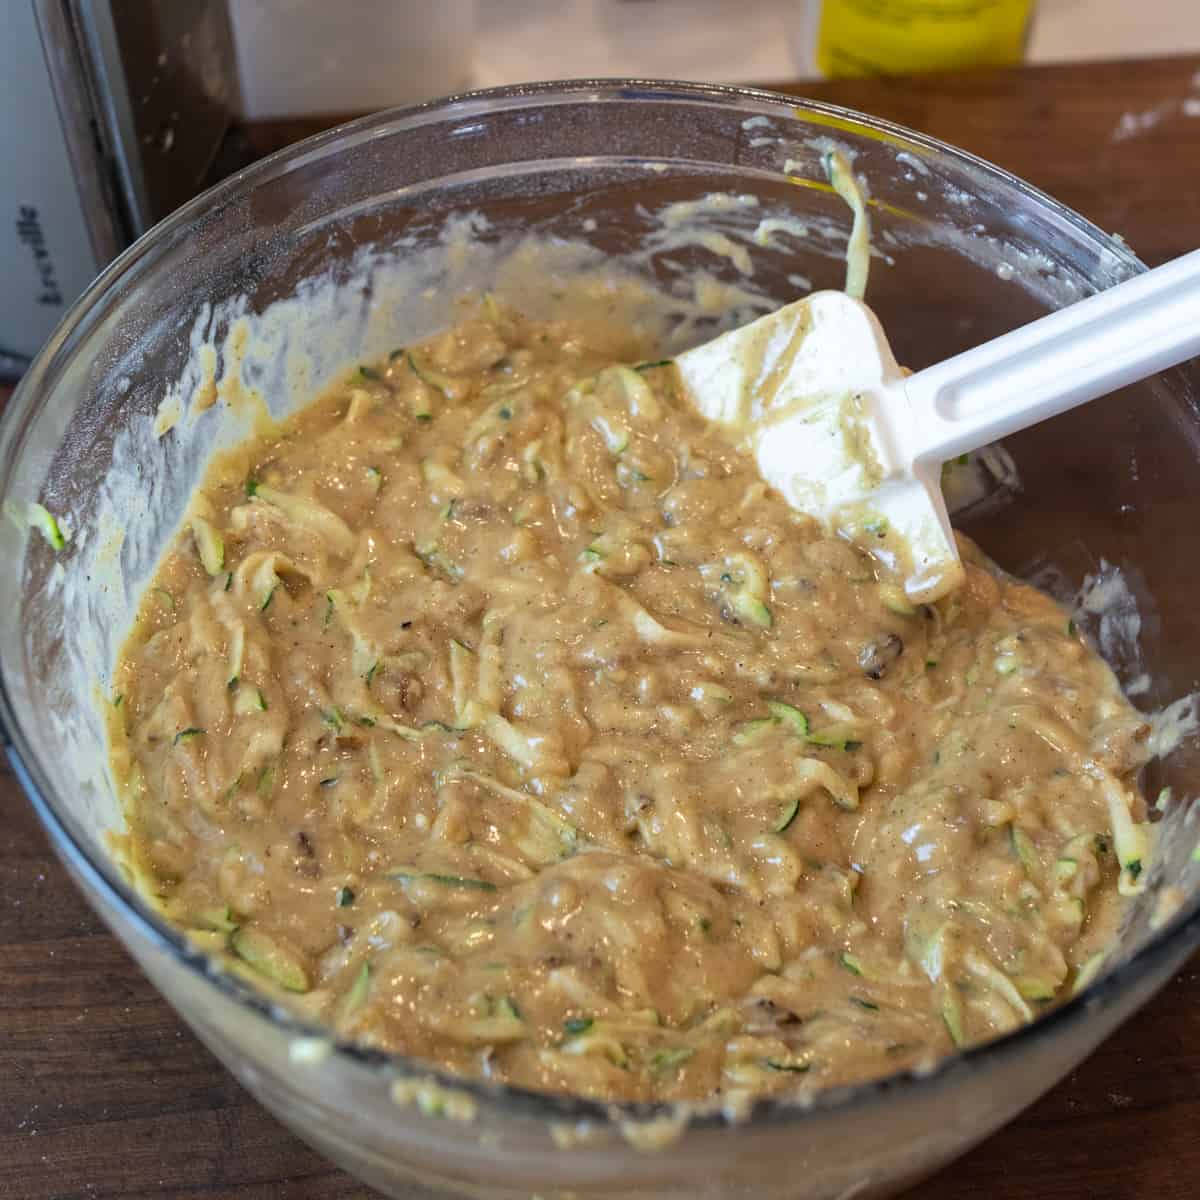 Zucchini batter mixed and ready to go into loaf pans.